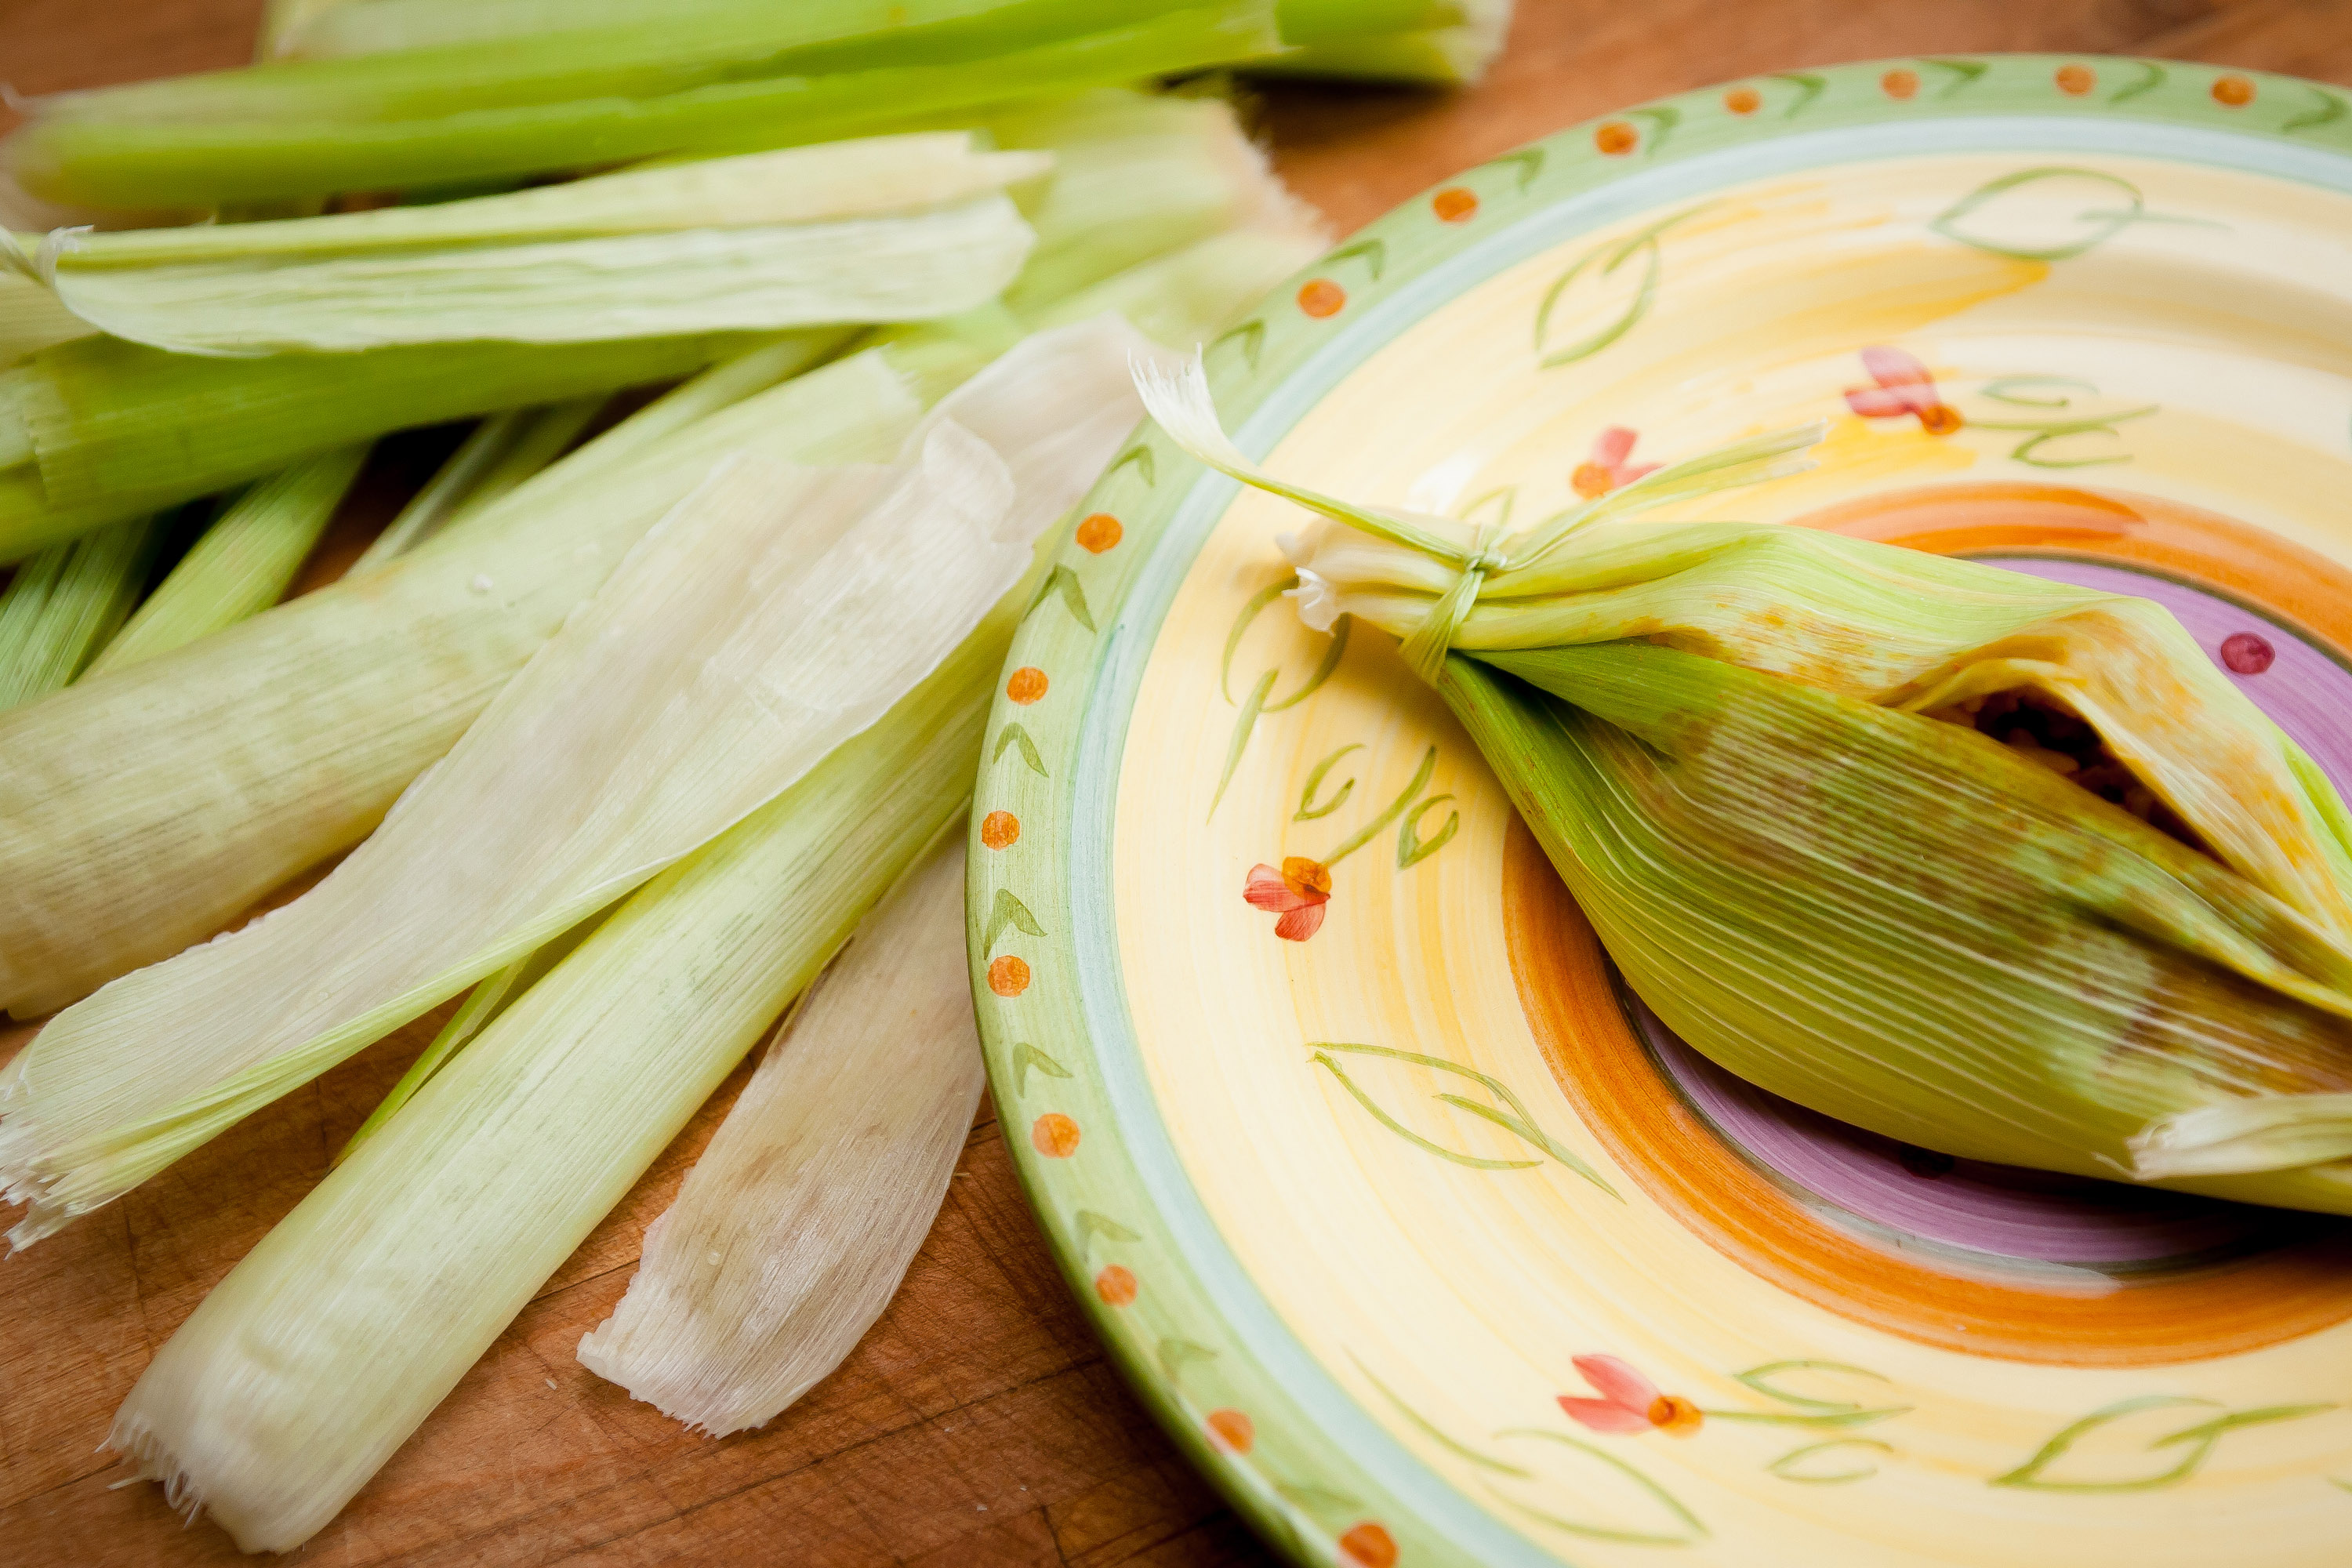 How to Dry Corn Husks for Tamales